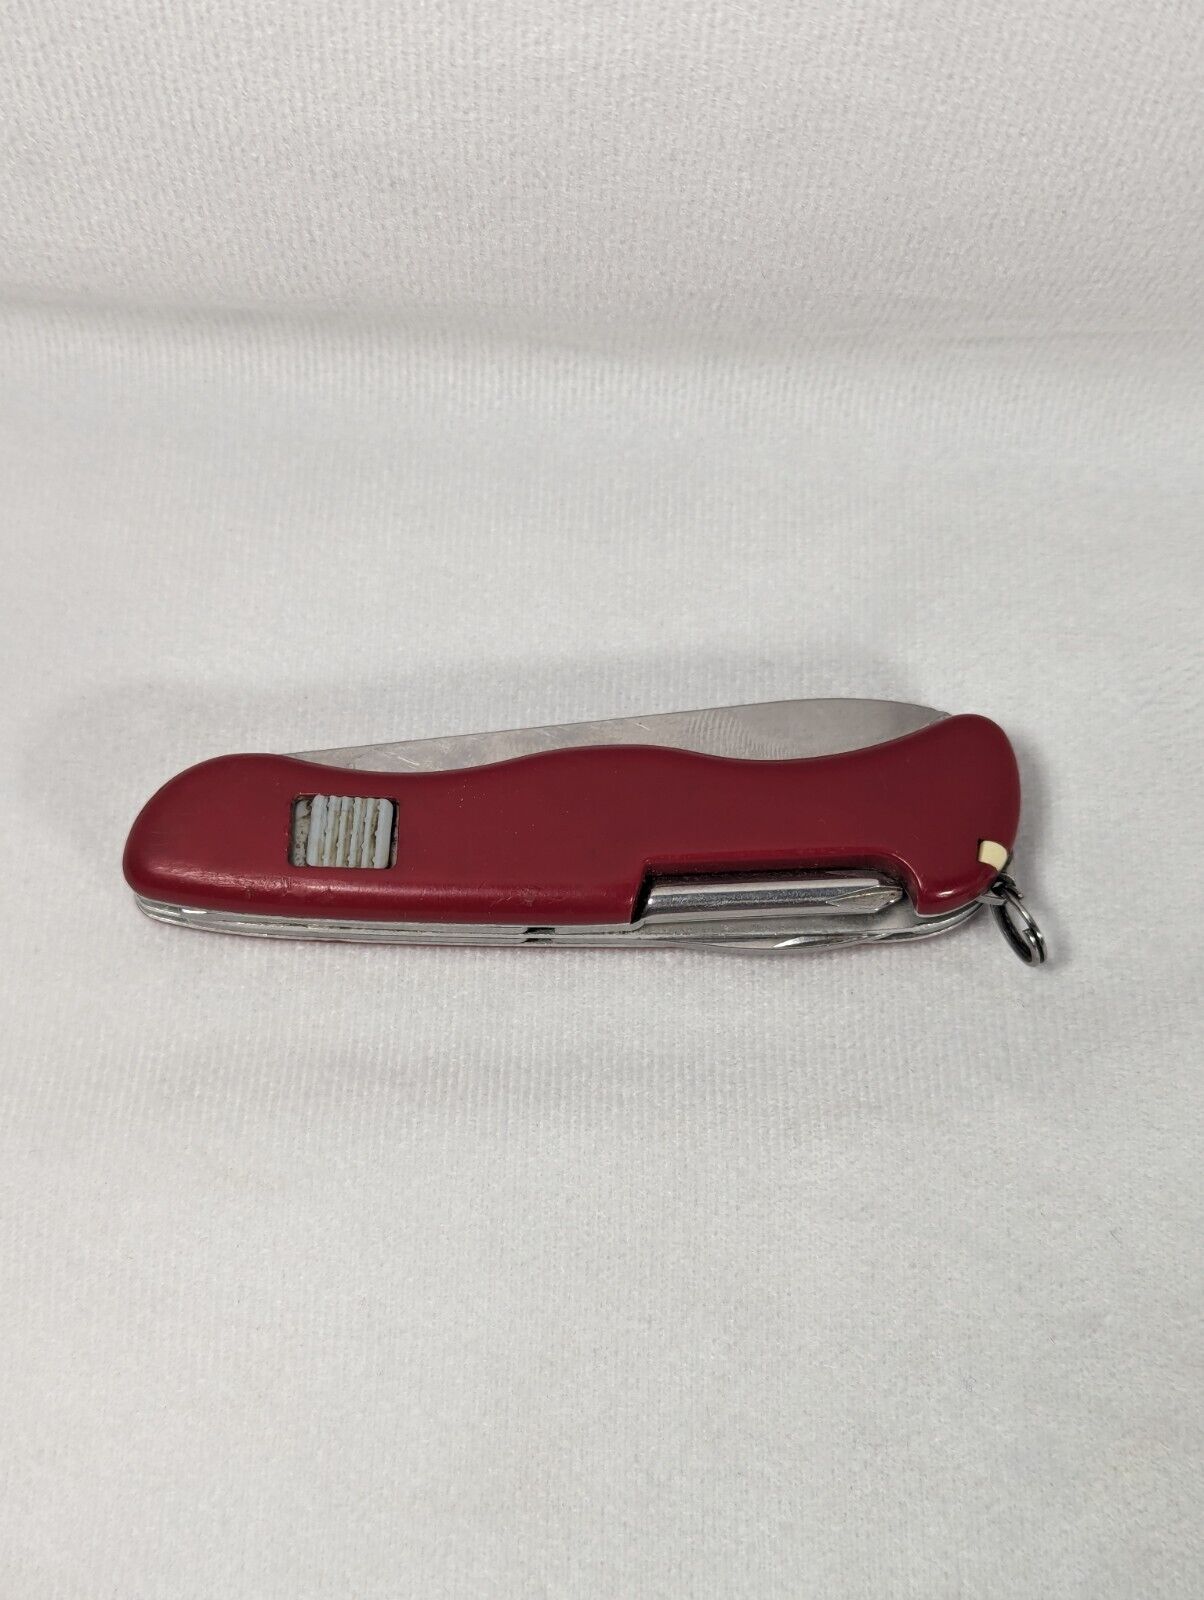 Victorinox Adventurer Red Large Swiss Army Knife 11 Function 111mm Used